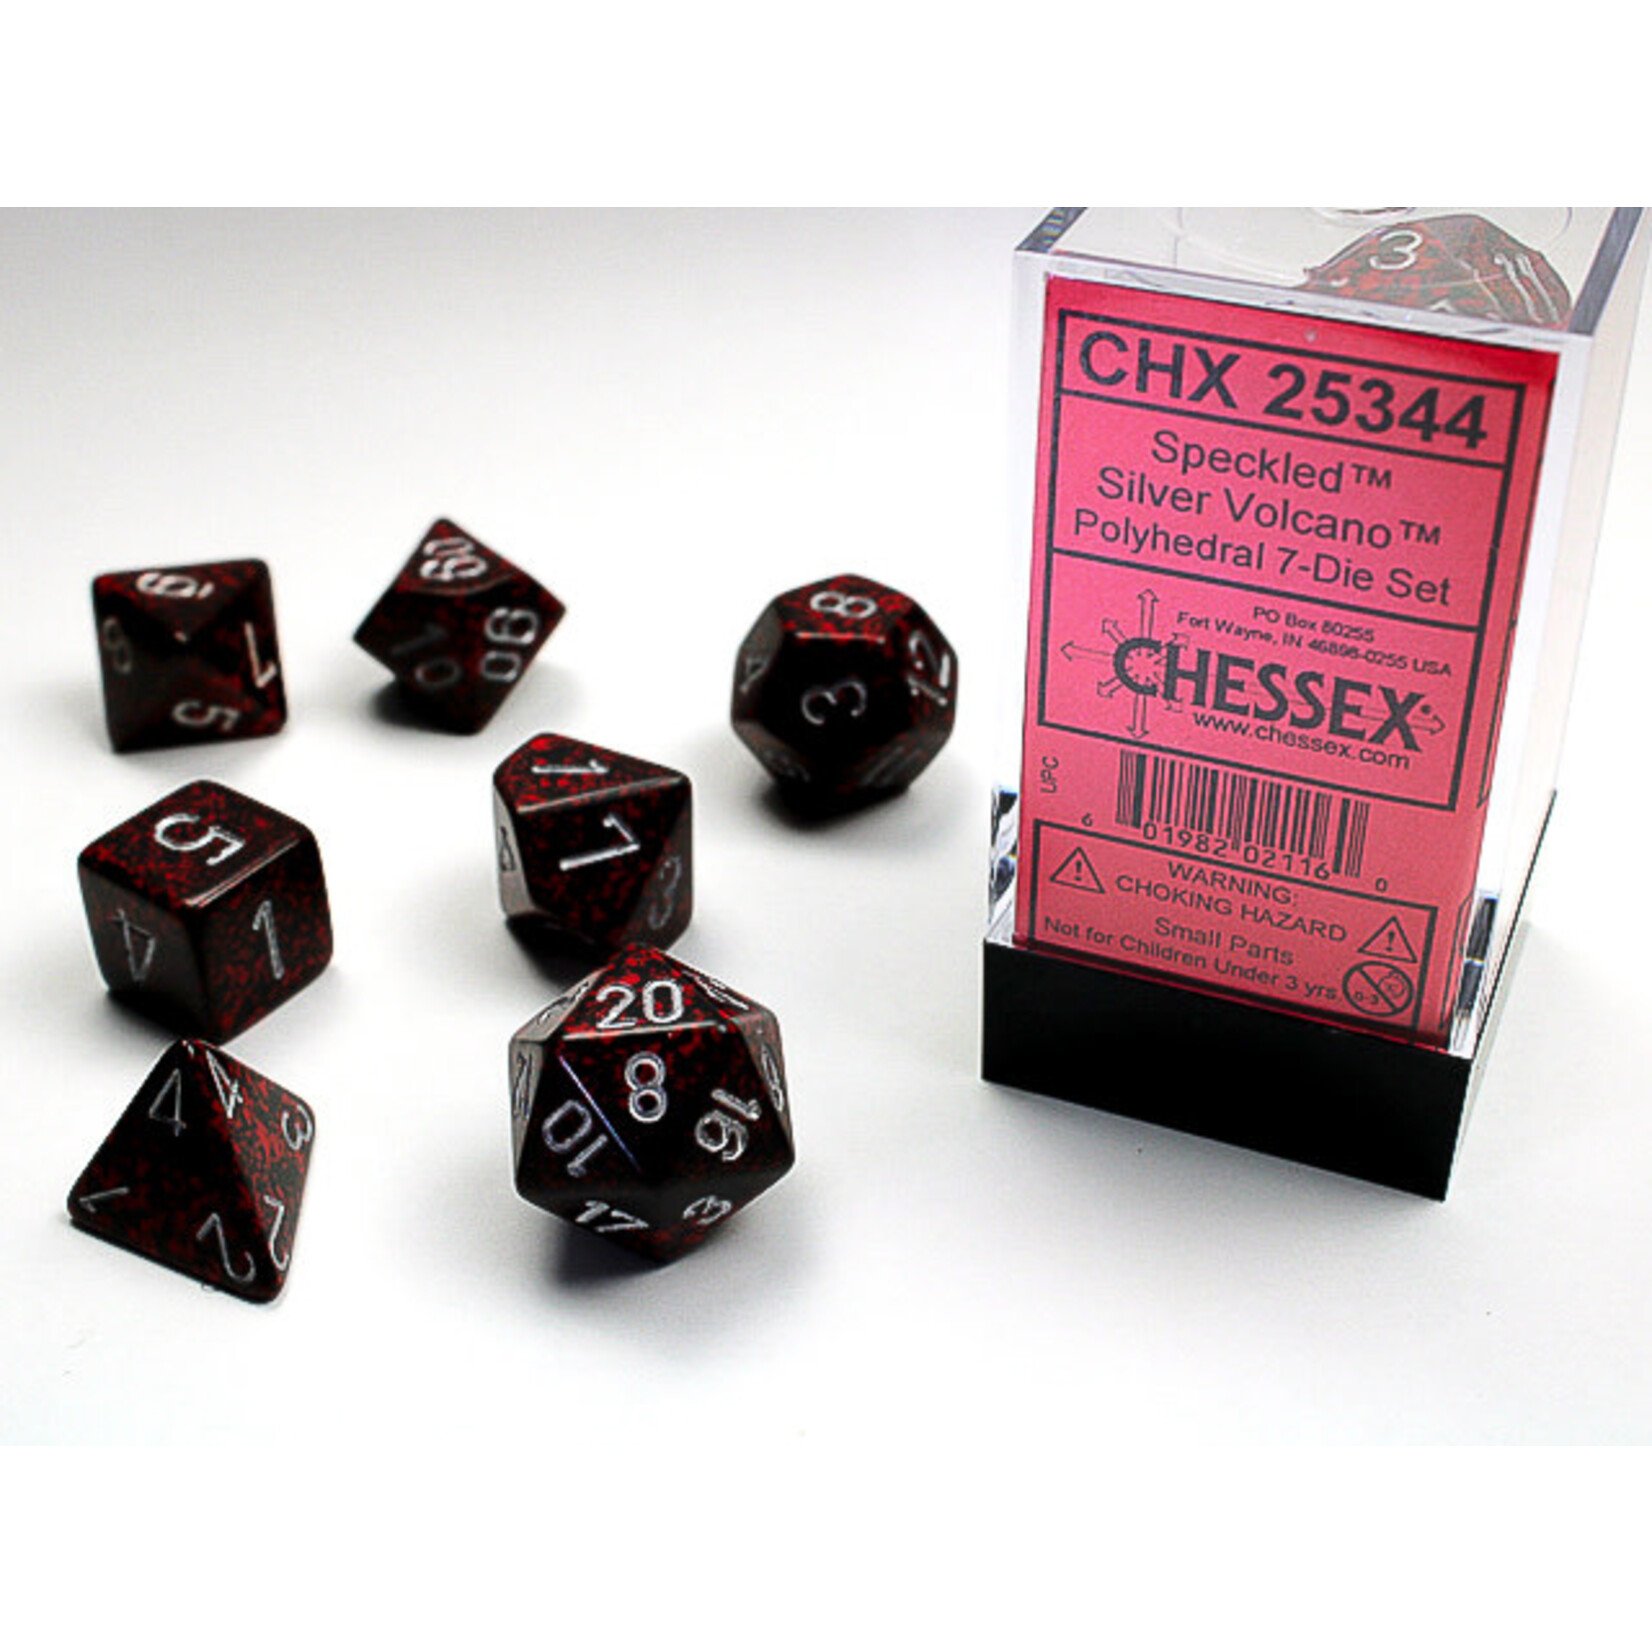 Chessex Speckled Silver Volcano Polyhedral 7-Dice Set